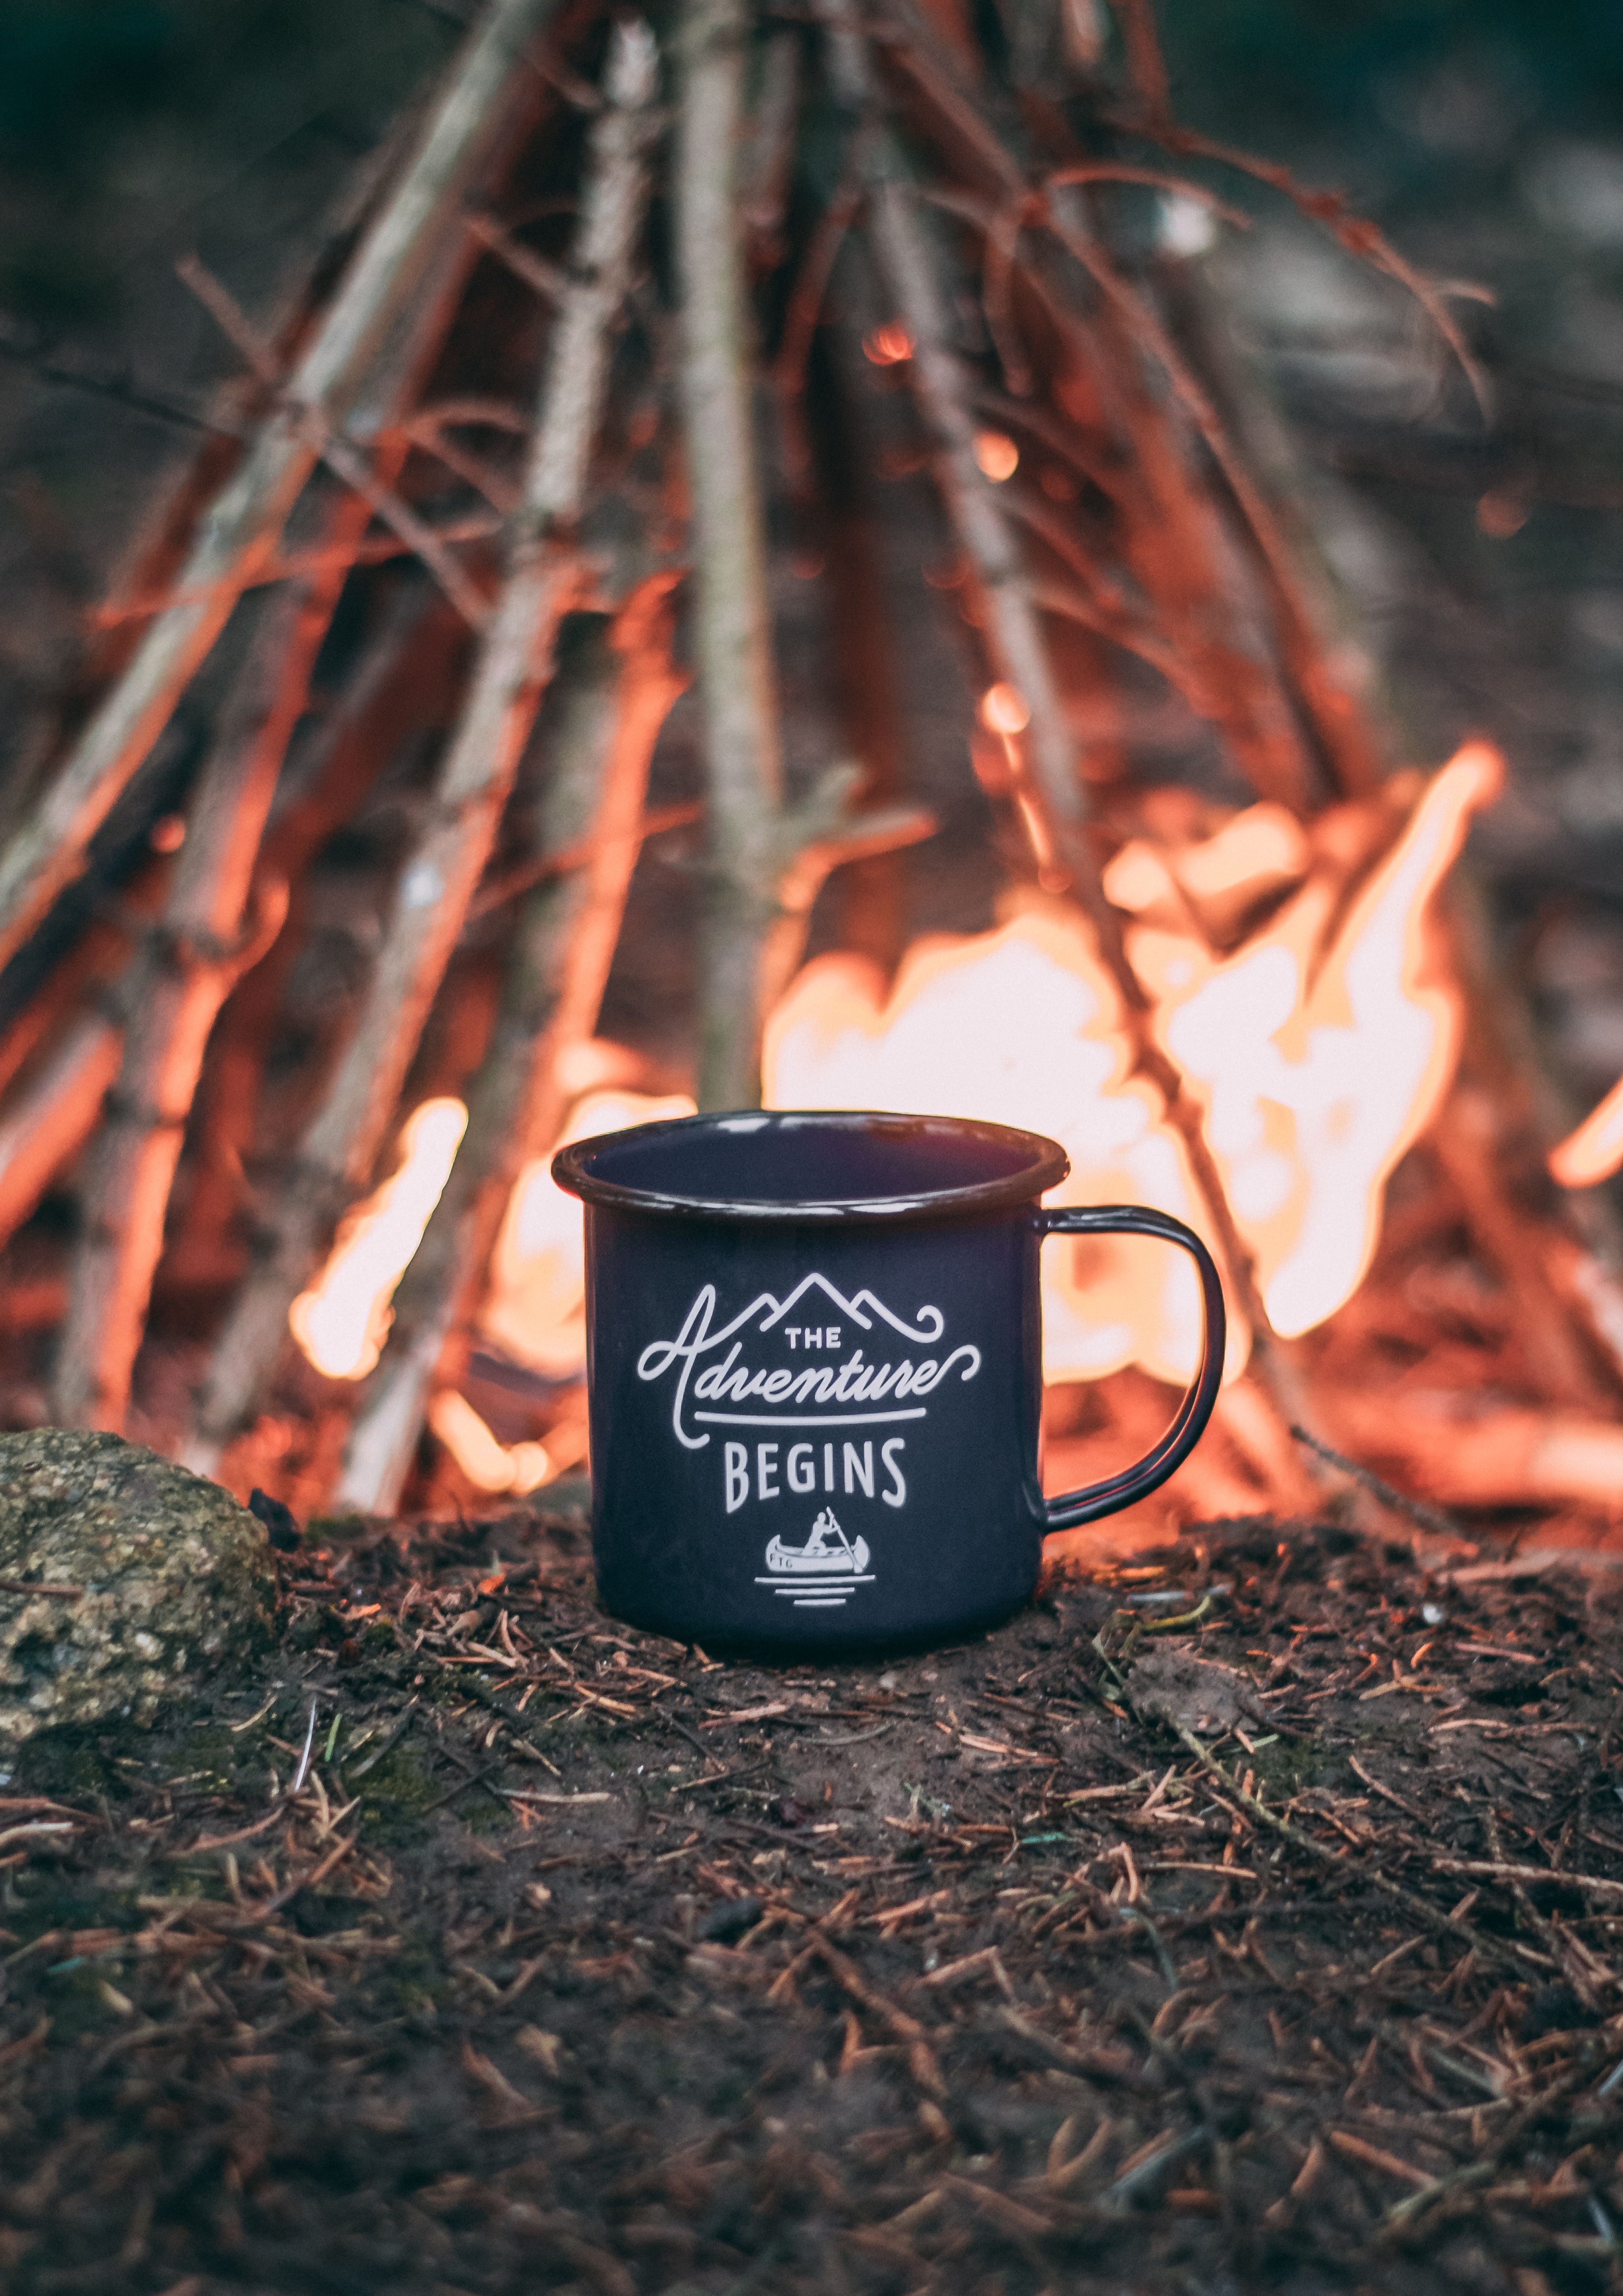 A cozy coffe cup that says The Adventure Begins, next to a warm fire